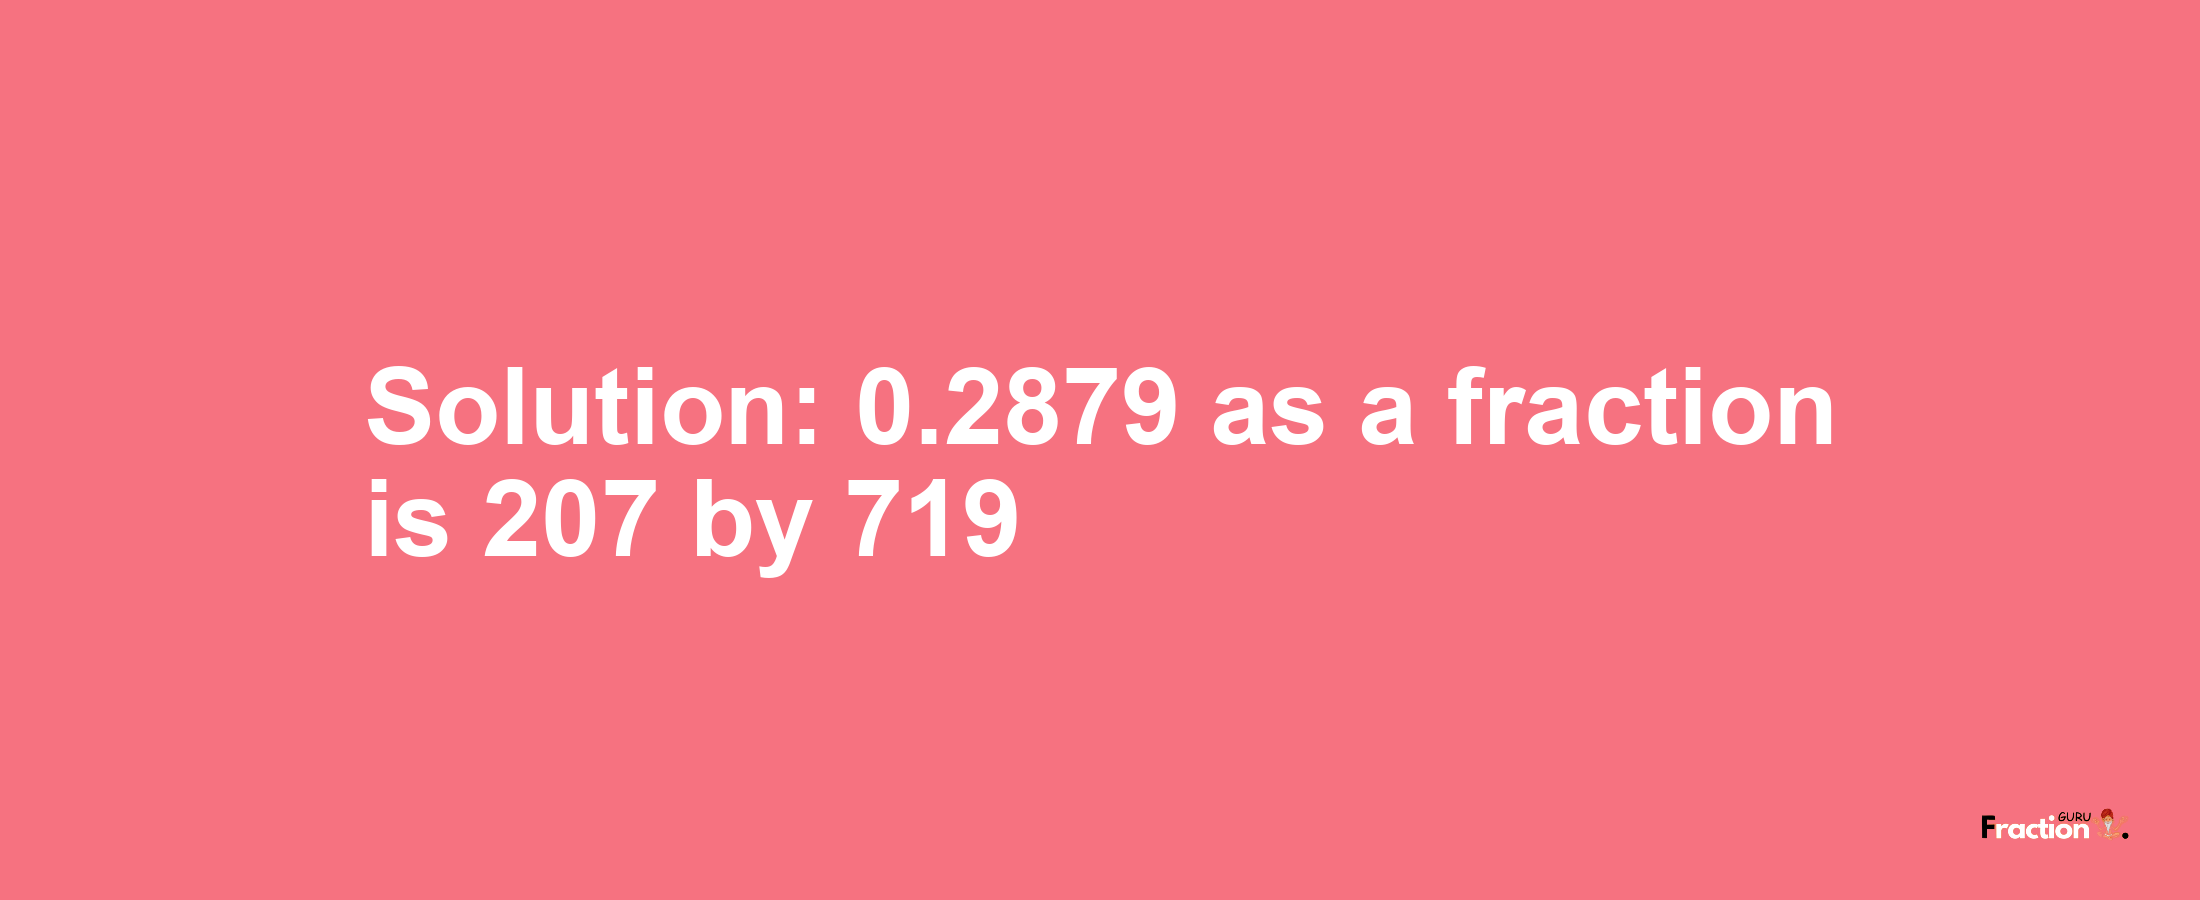 Solution:0.2879 as a fraction is 207/719